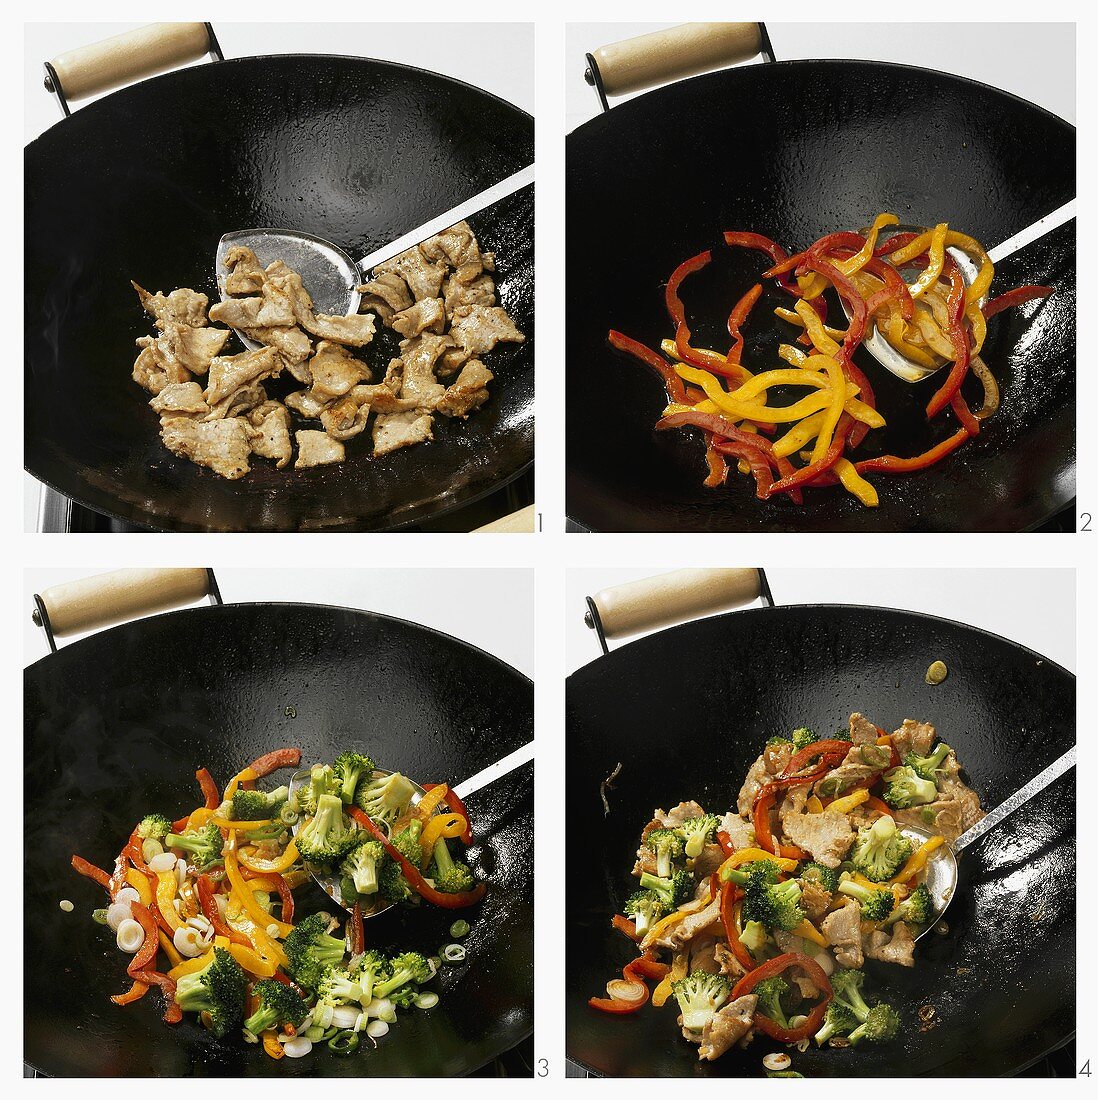 Cooking pork and vegetables in a wok